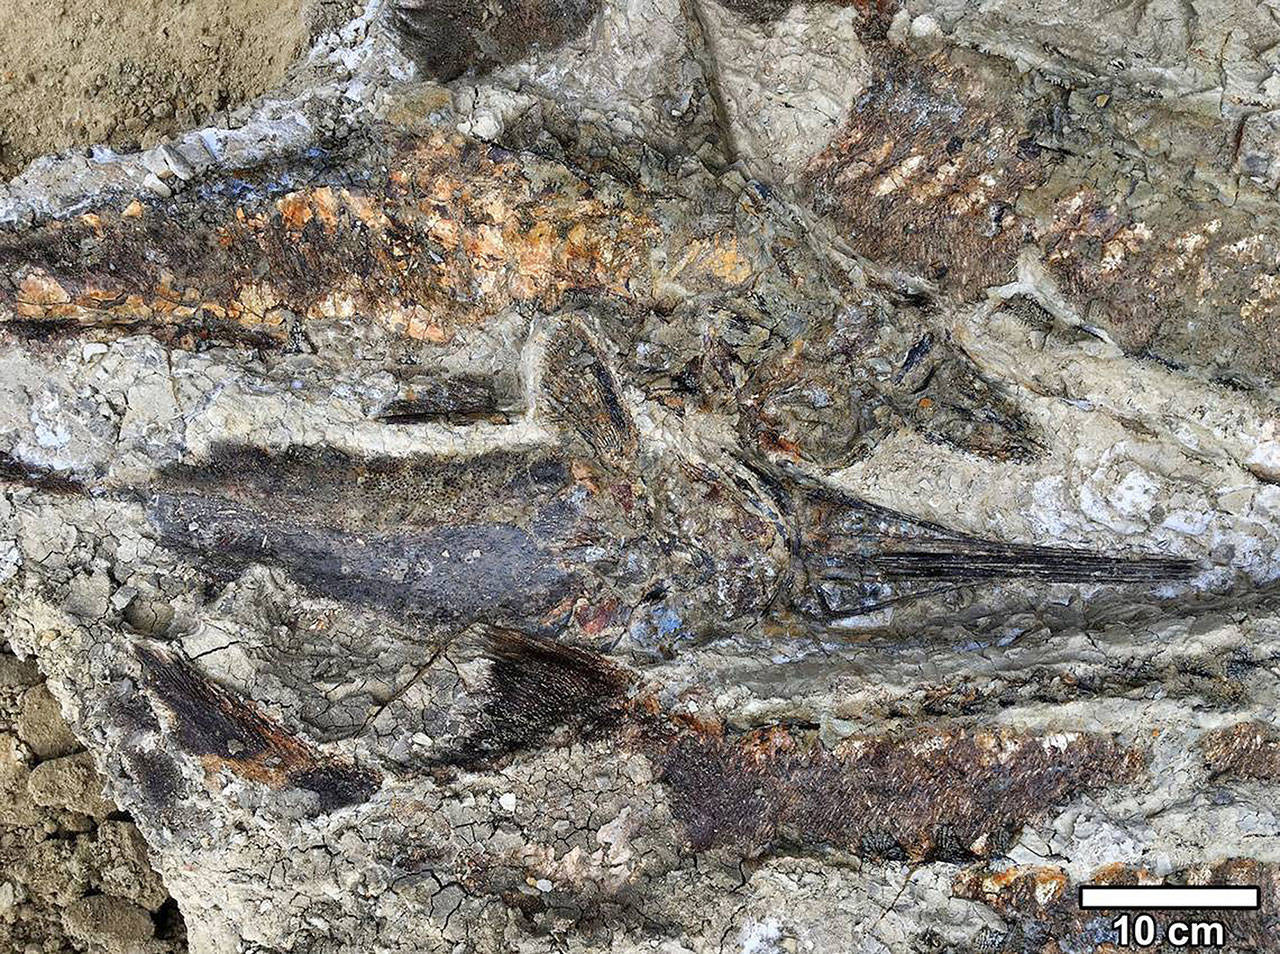 KU doctoral student Robert DePalma discovered these fish fossils in North Dakota, a glimpse of the devastating moments after a giant asteroid crashed into Earth. (Robert DePalma/University of Kansas)